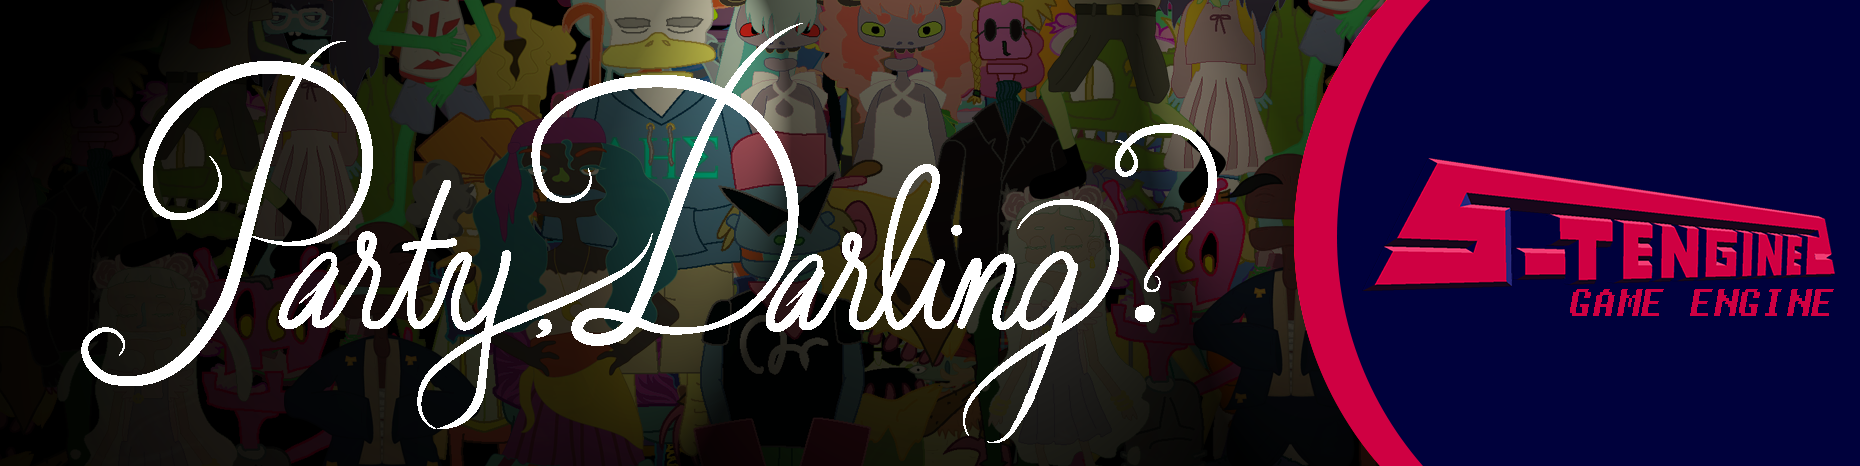 Party, Darling?